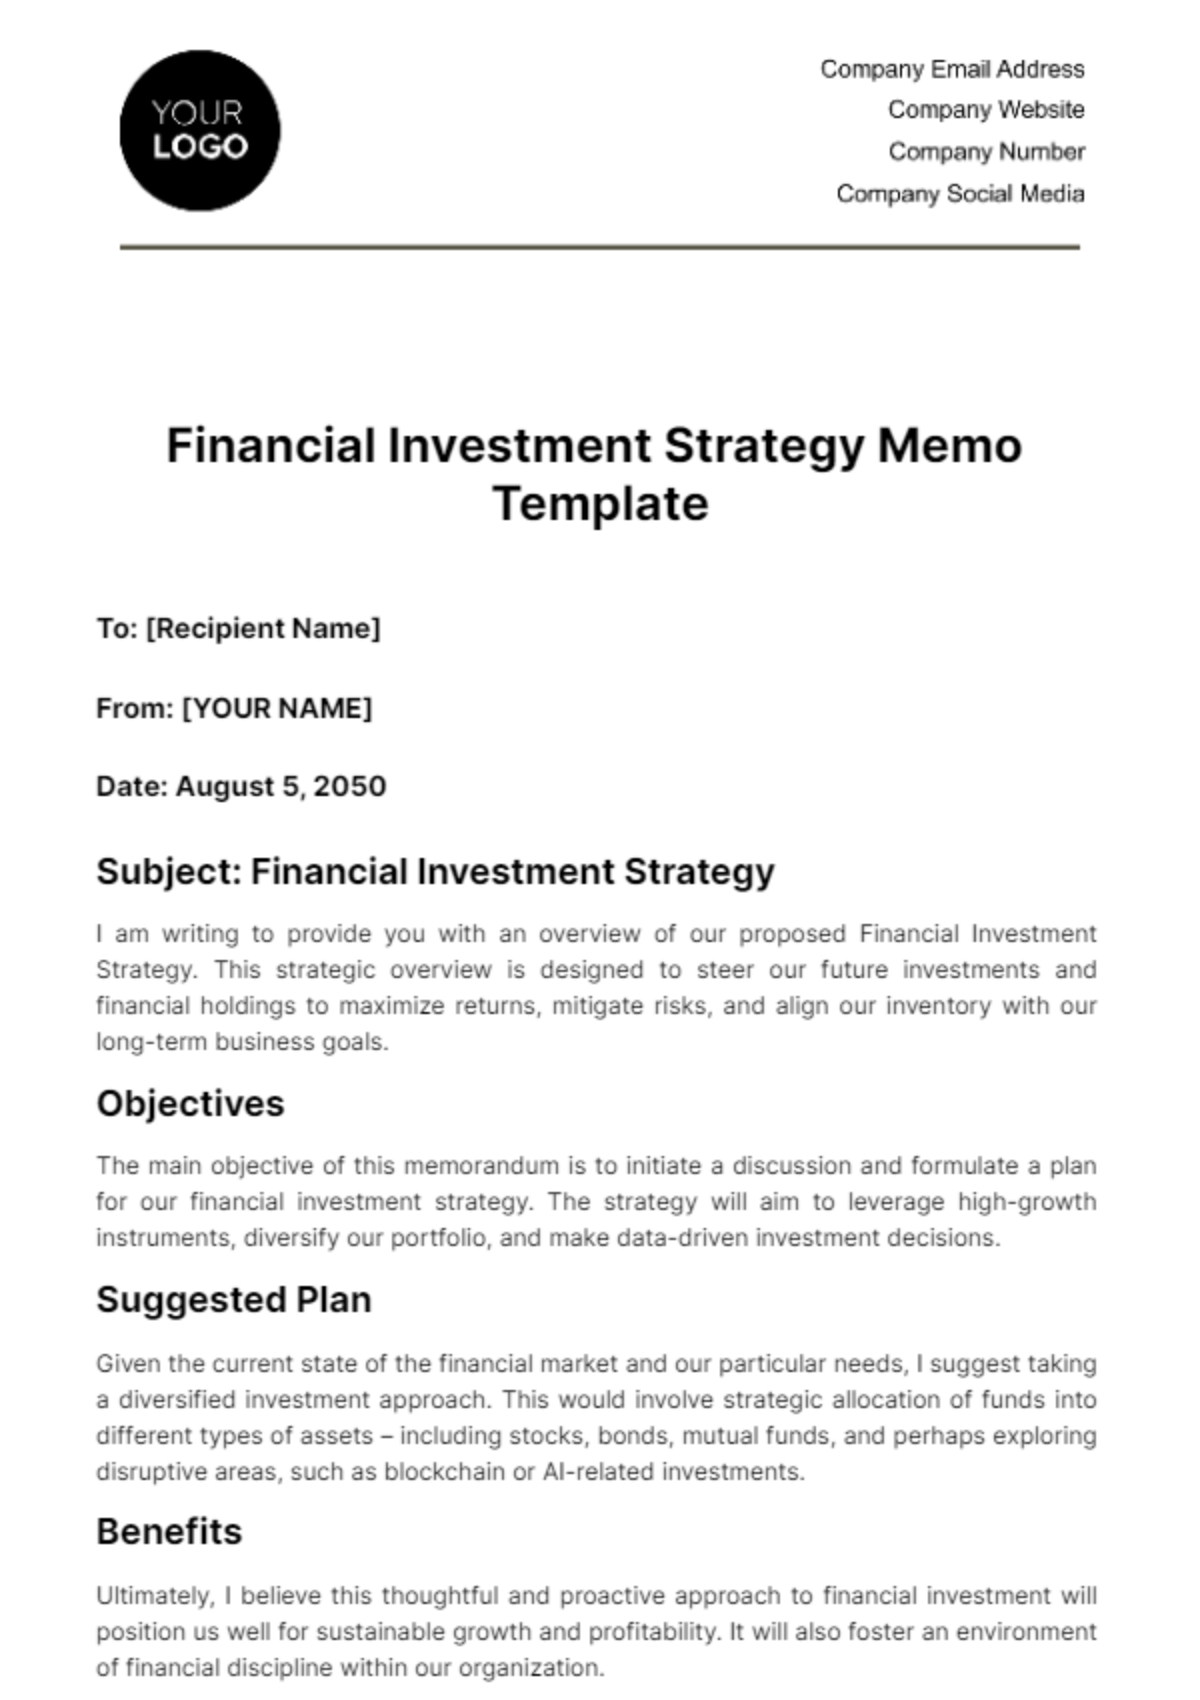 Financial Investment Strategy Memo Template